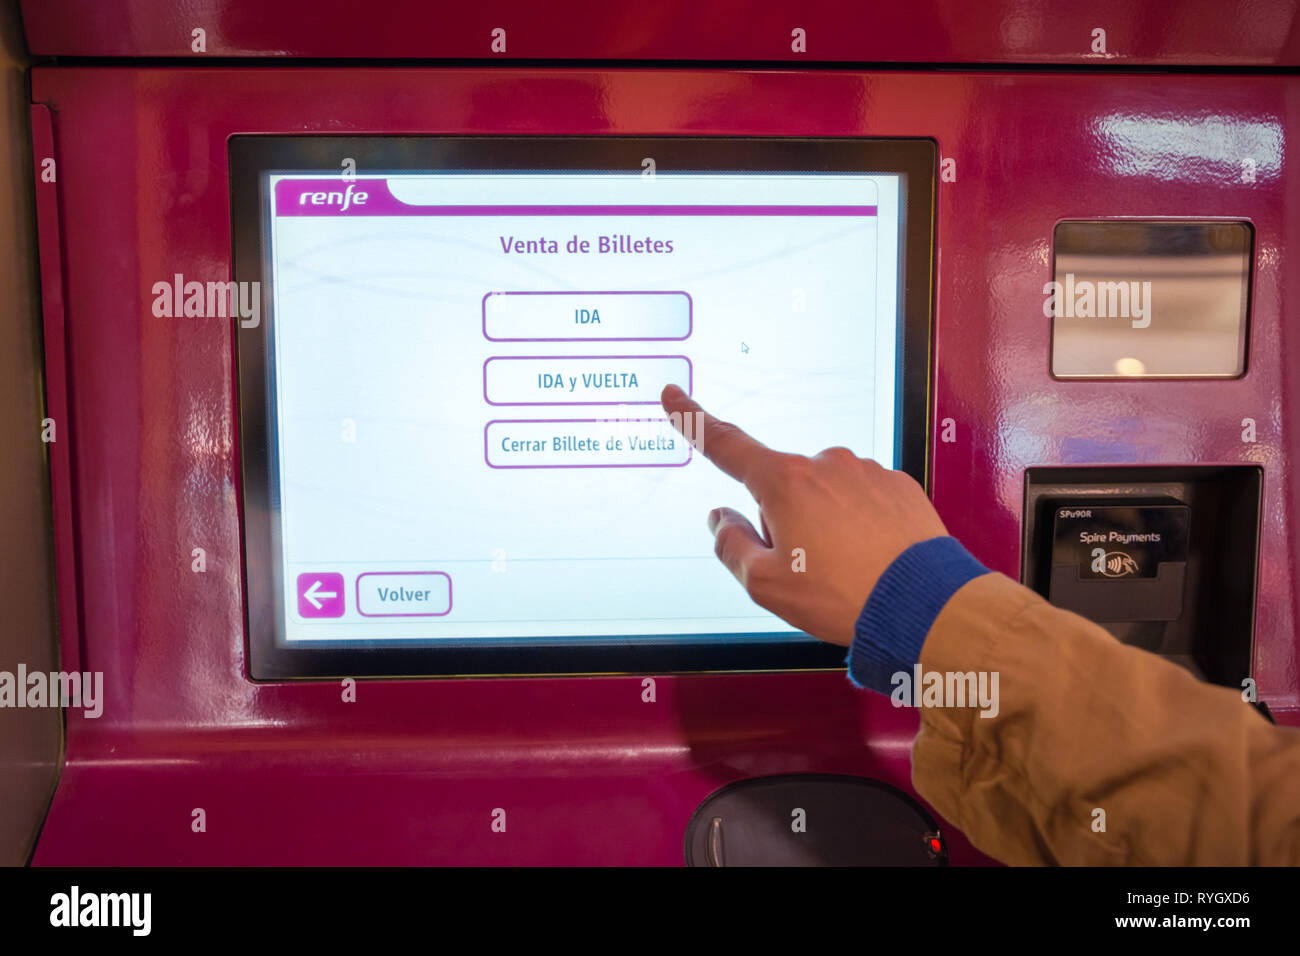 Valencia,Spain - March 09, 2019:   Finger selecting roundtrip on the touchscreen of Renfe ticket terminal. Railway ticket purchase, Spain. Stock Photo